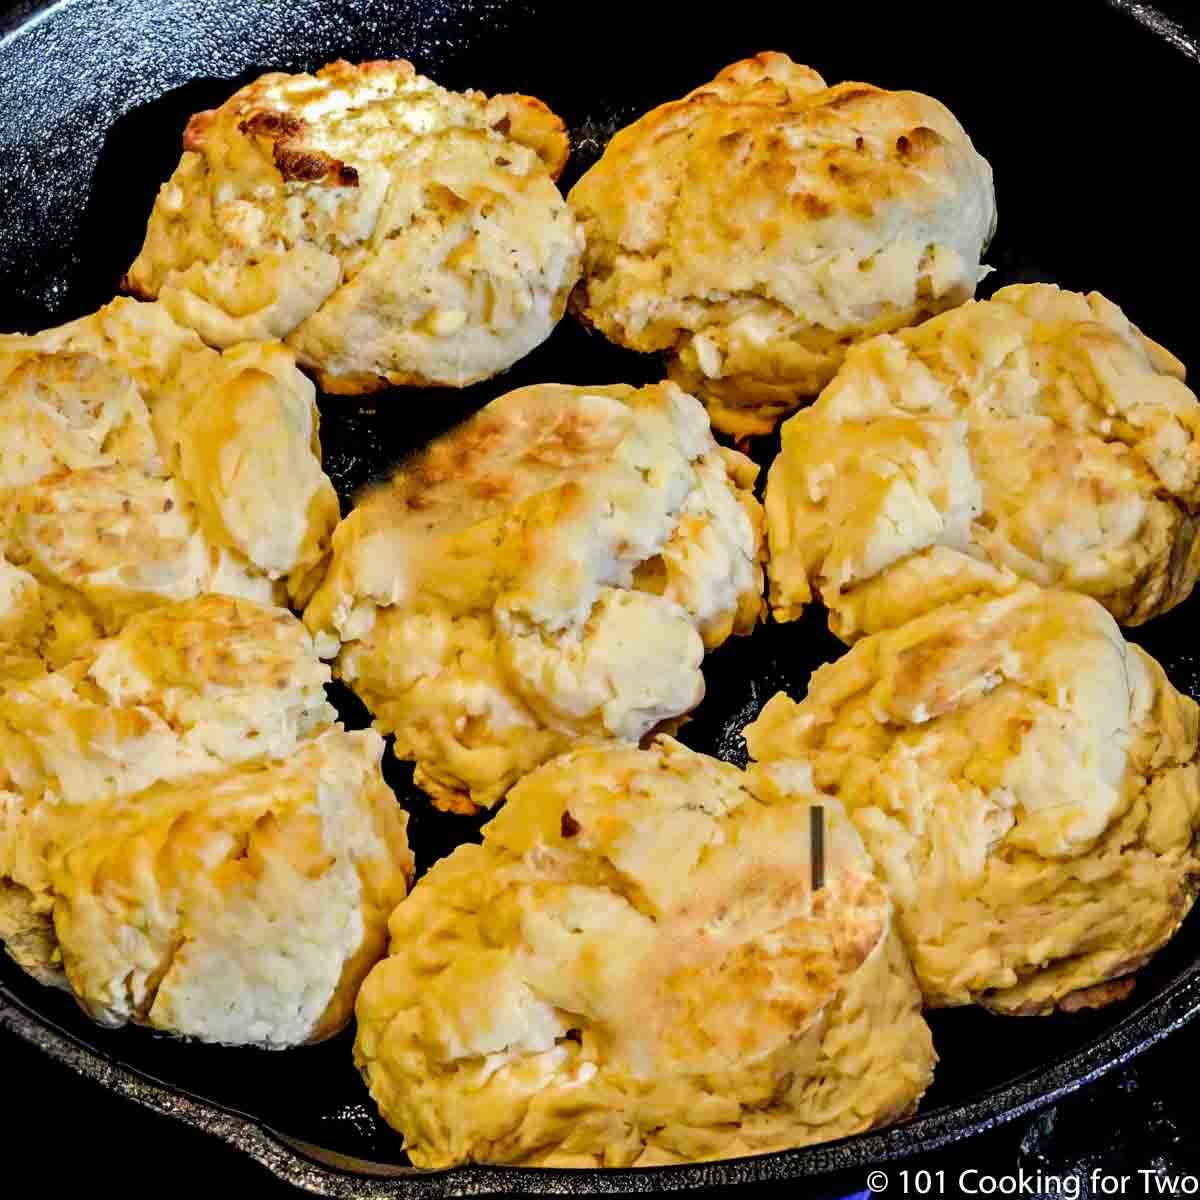 grill biscuits in a cast iron skillet.